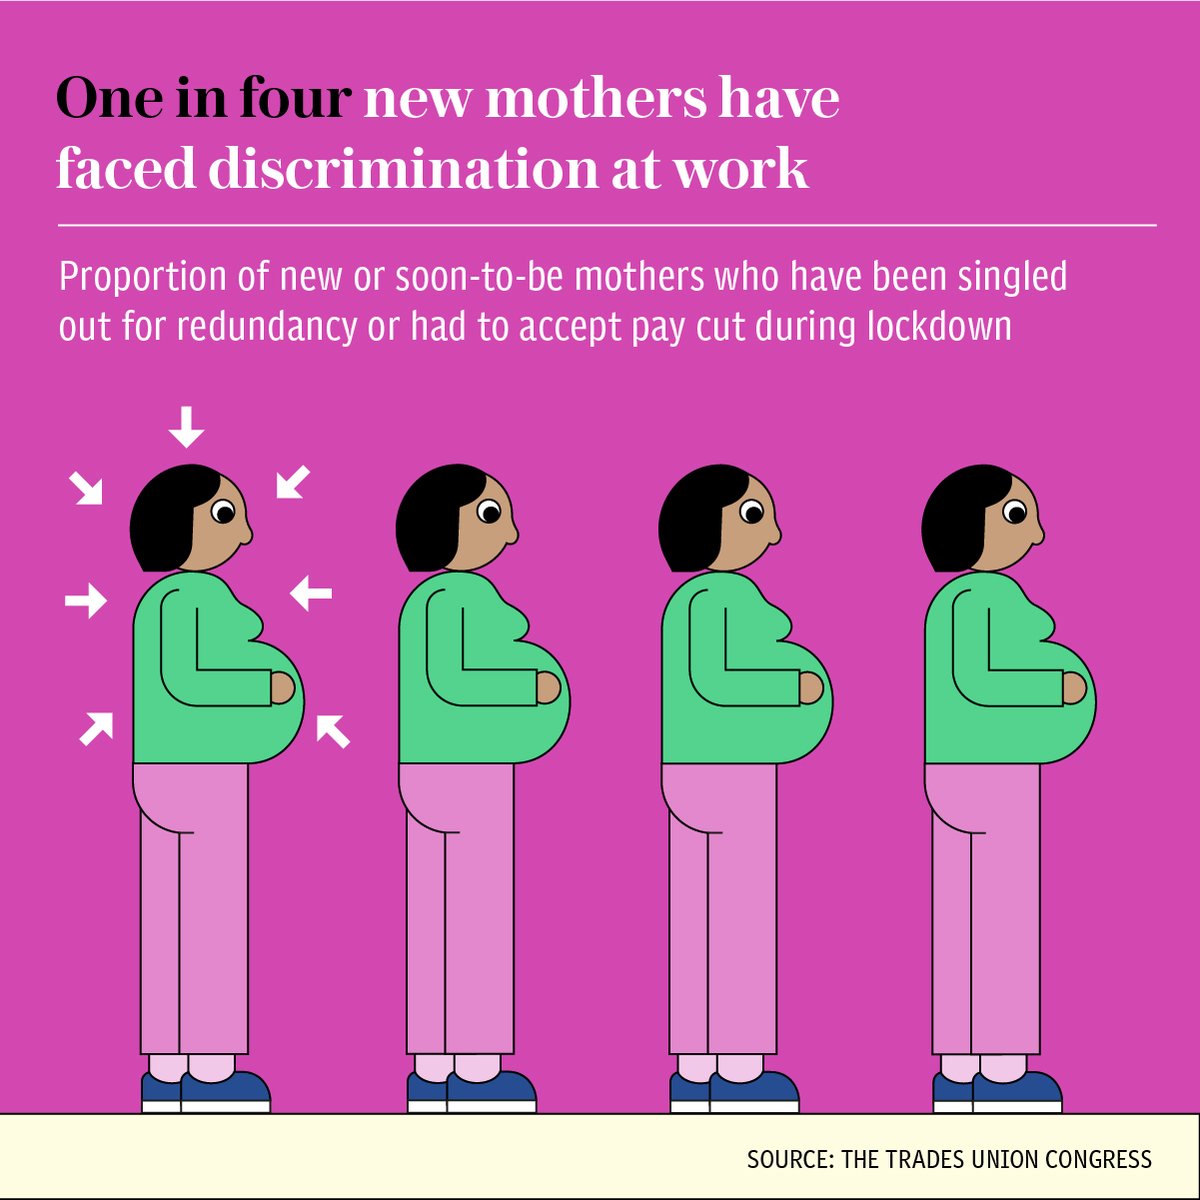 If that was not enough of a problem, 1 in 4 new or soon-to-be mothers claim to have faced discrimination at work during lockdown, such as being singled out for redundancy or furlough, according to the Trades Union Congress ( @The_TUC)